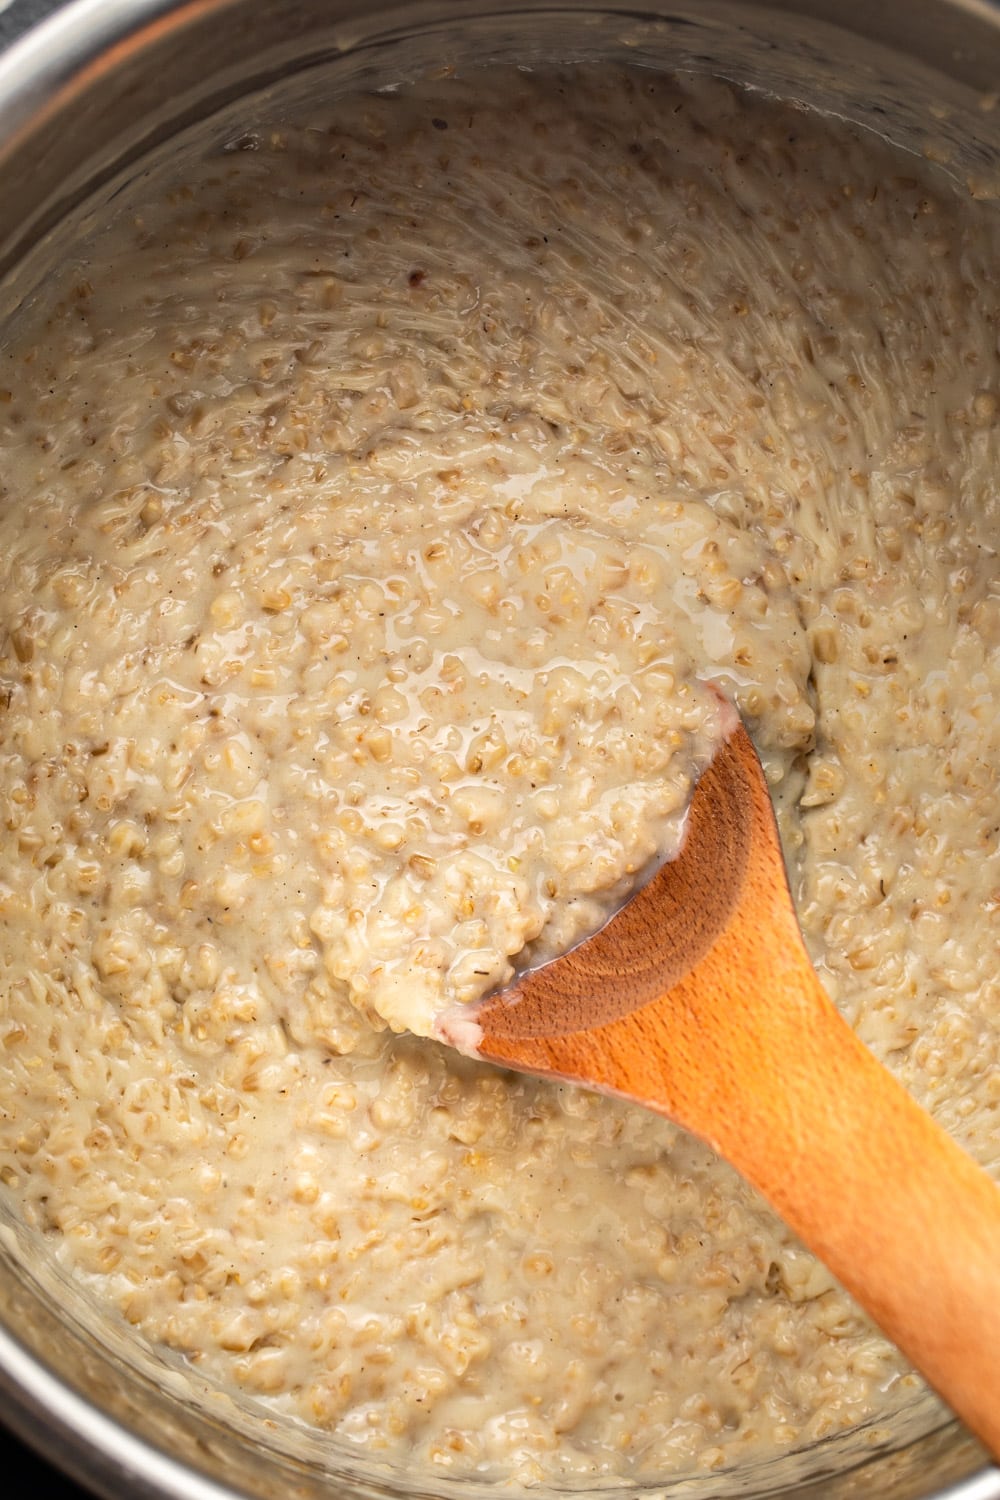 a zoomed in image of the texture of steel cut oats